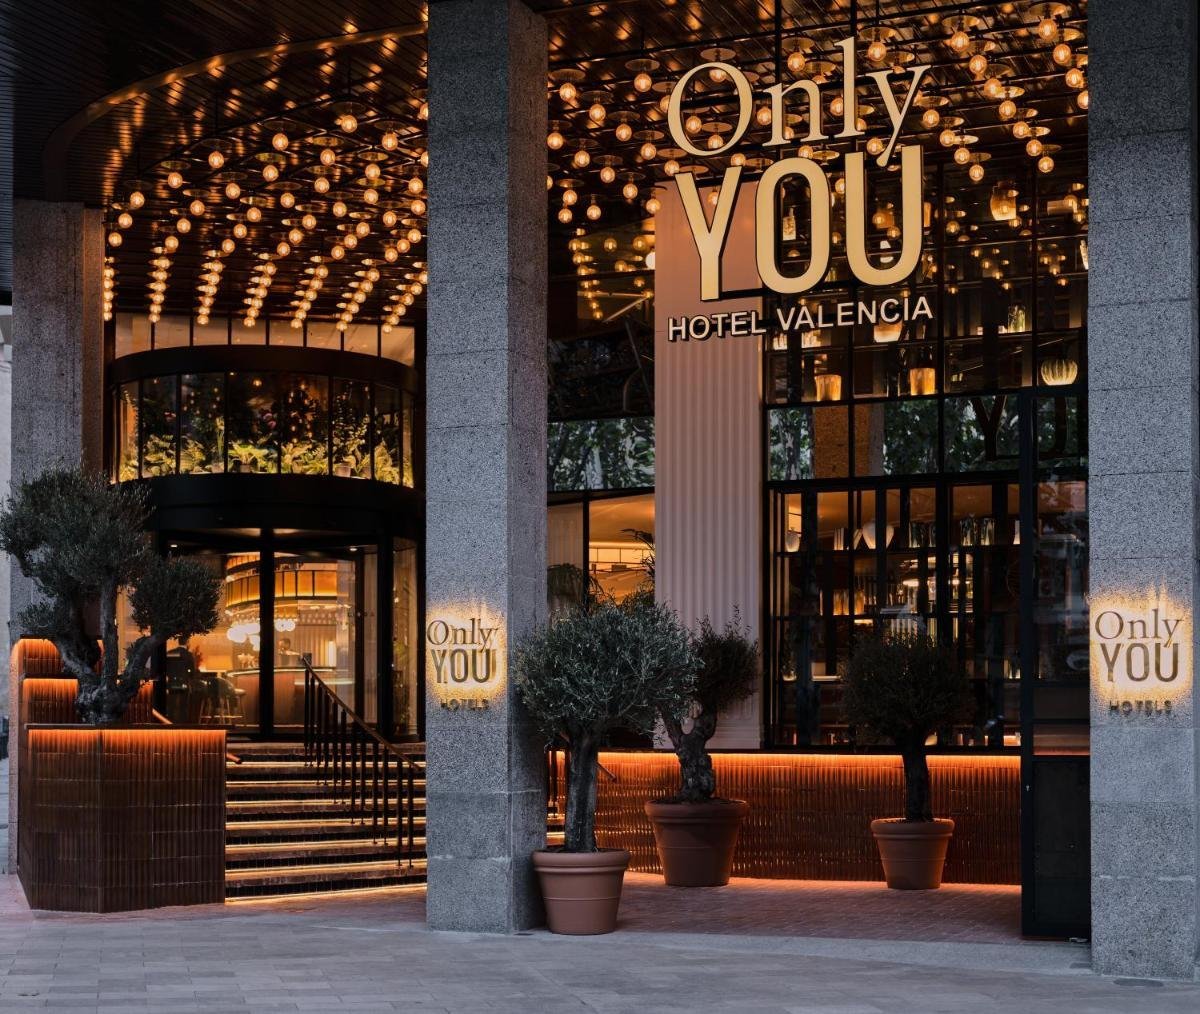 <p>Only YOU Hotel Valencia</p>
